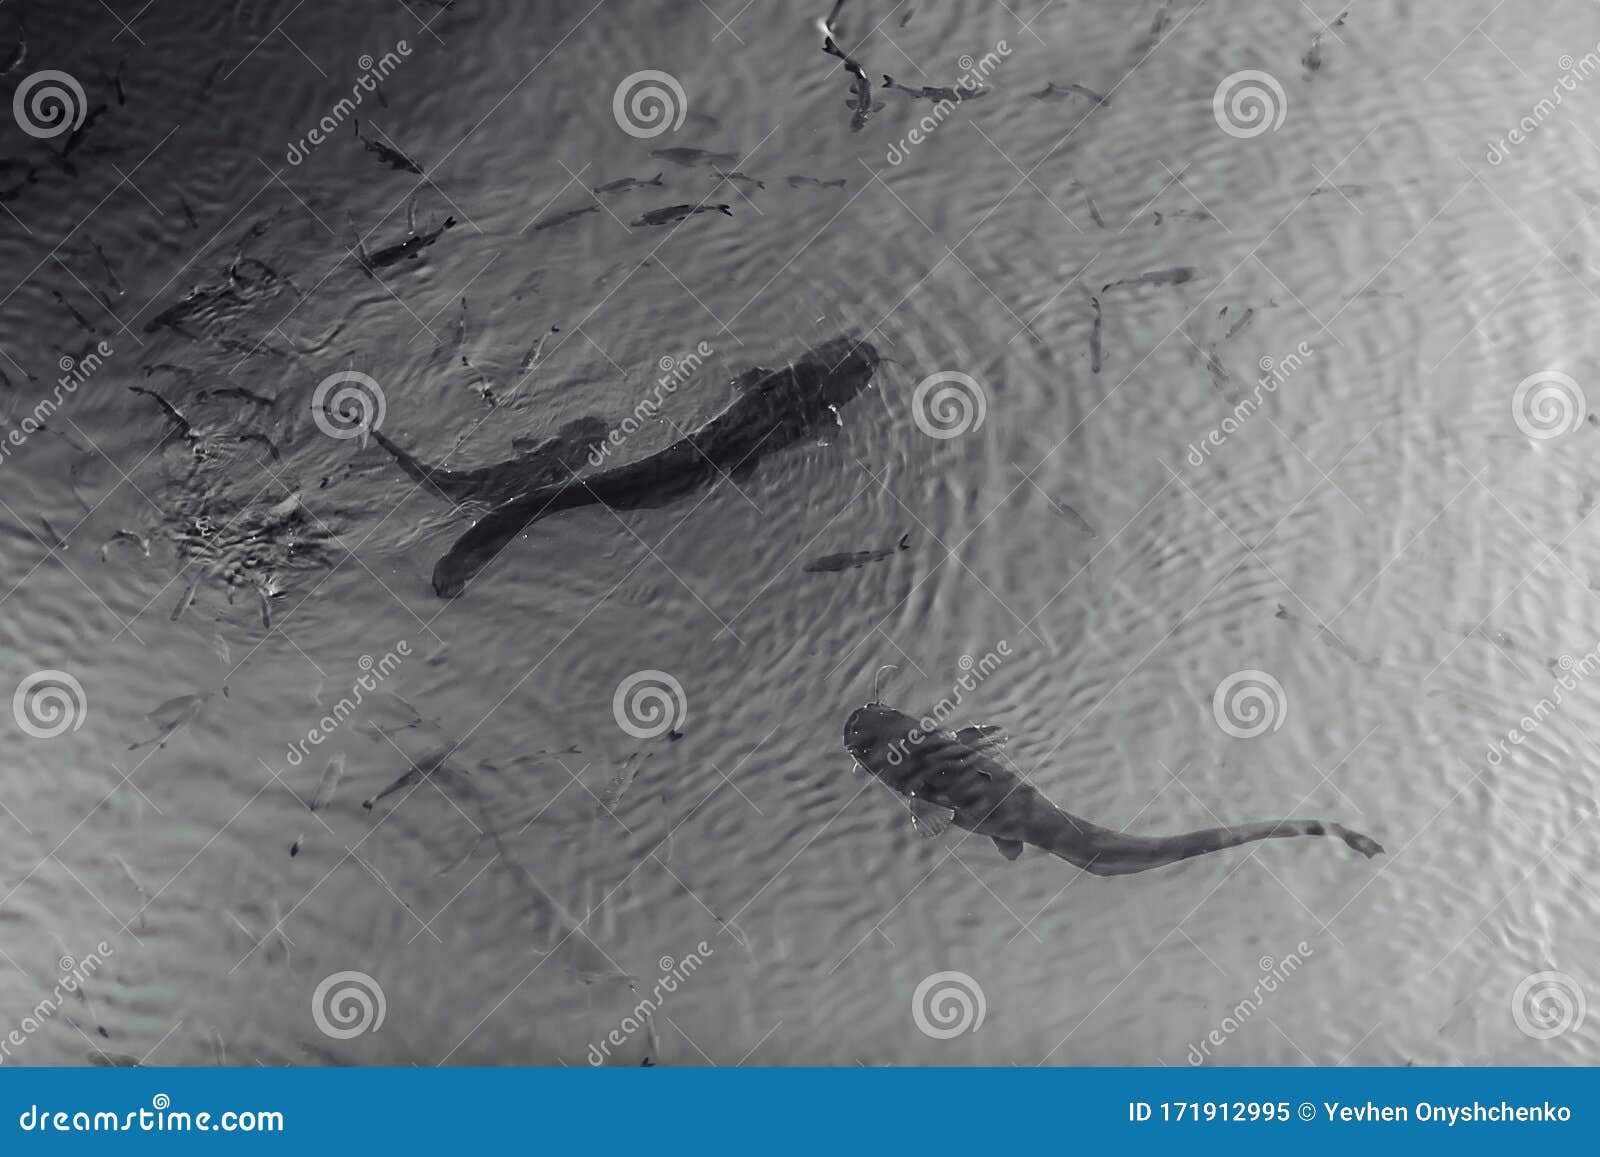 two giant black catfishes swimming in the pond with other small fishes in chernobyl zone